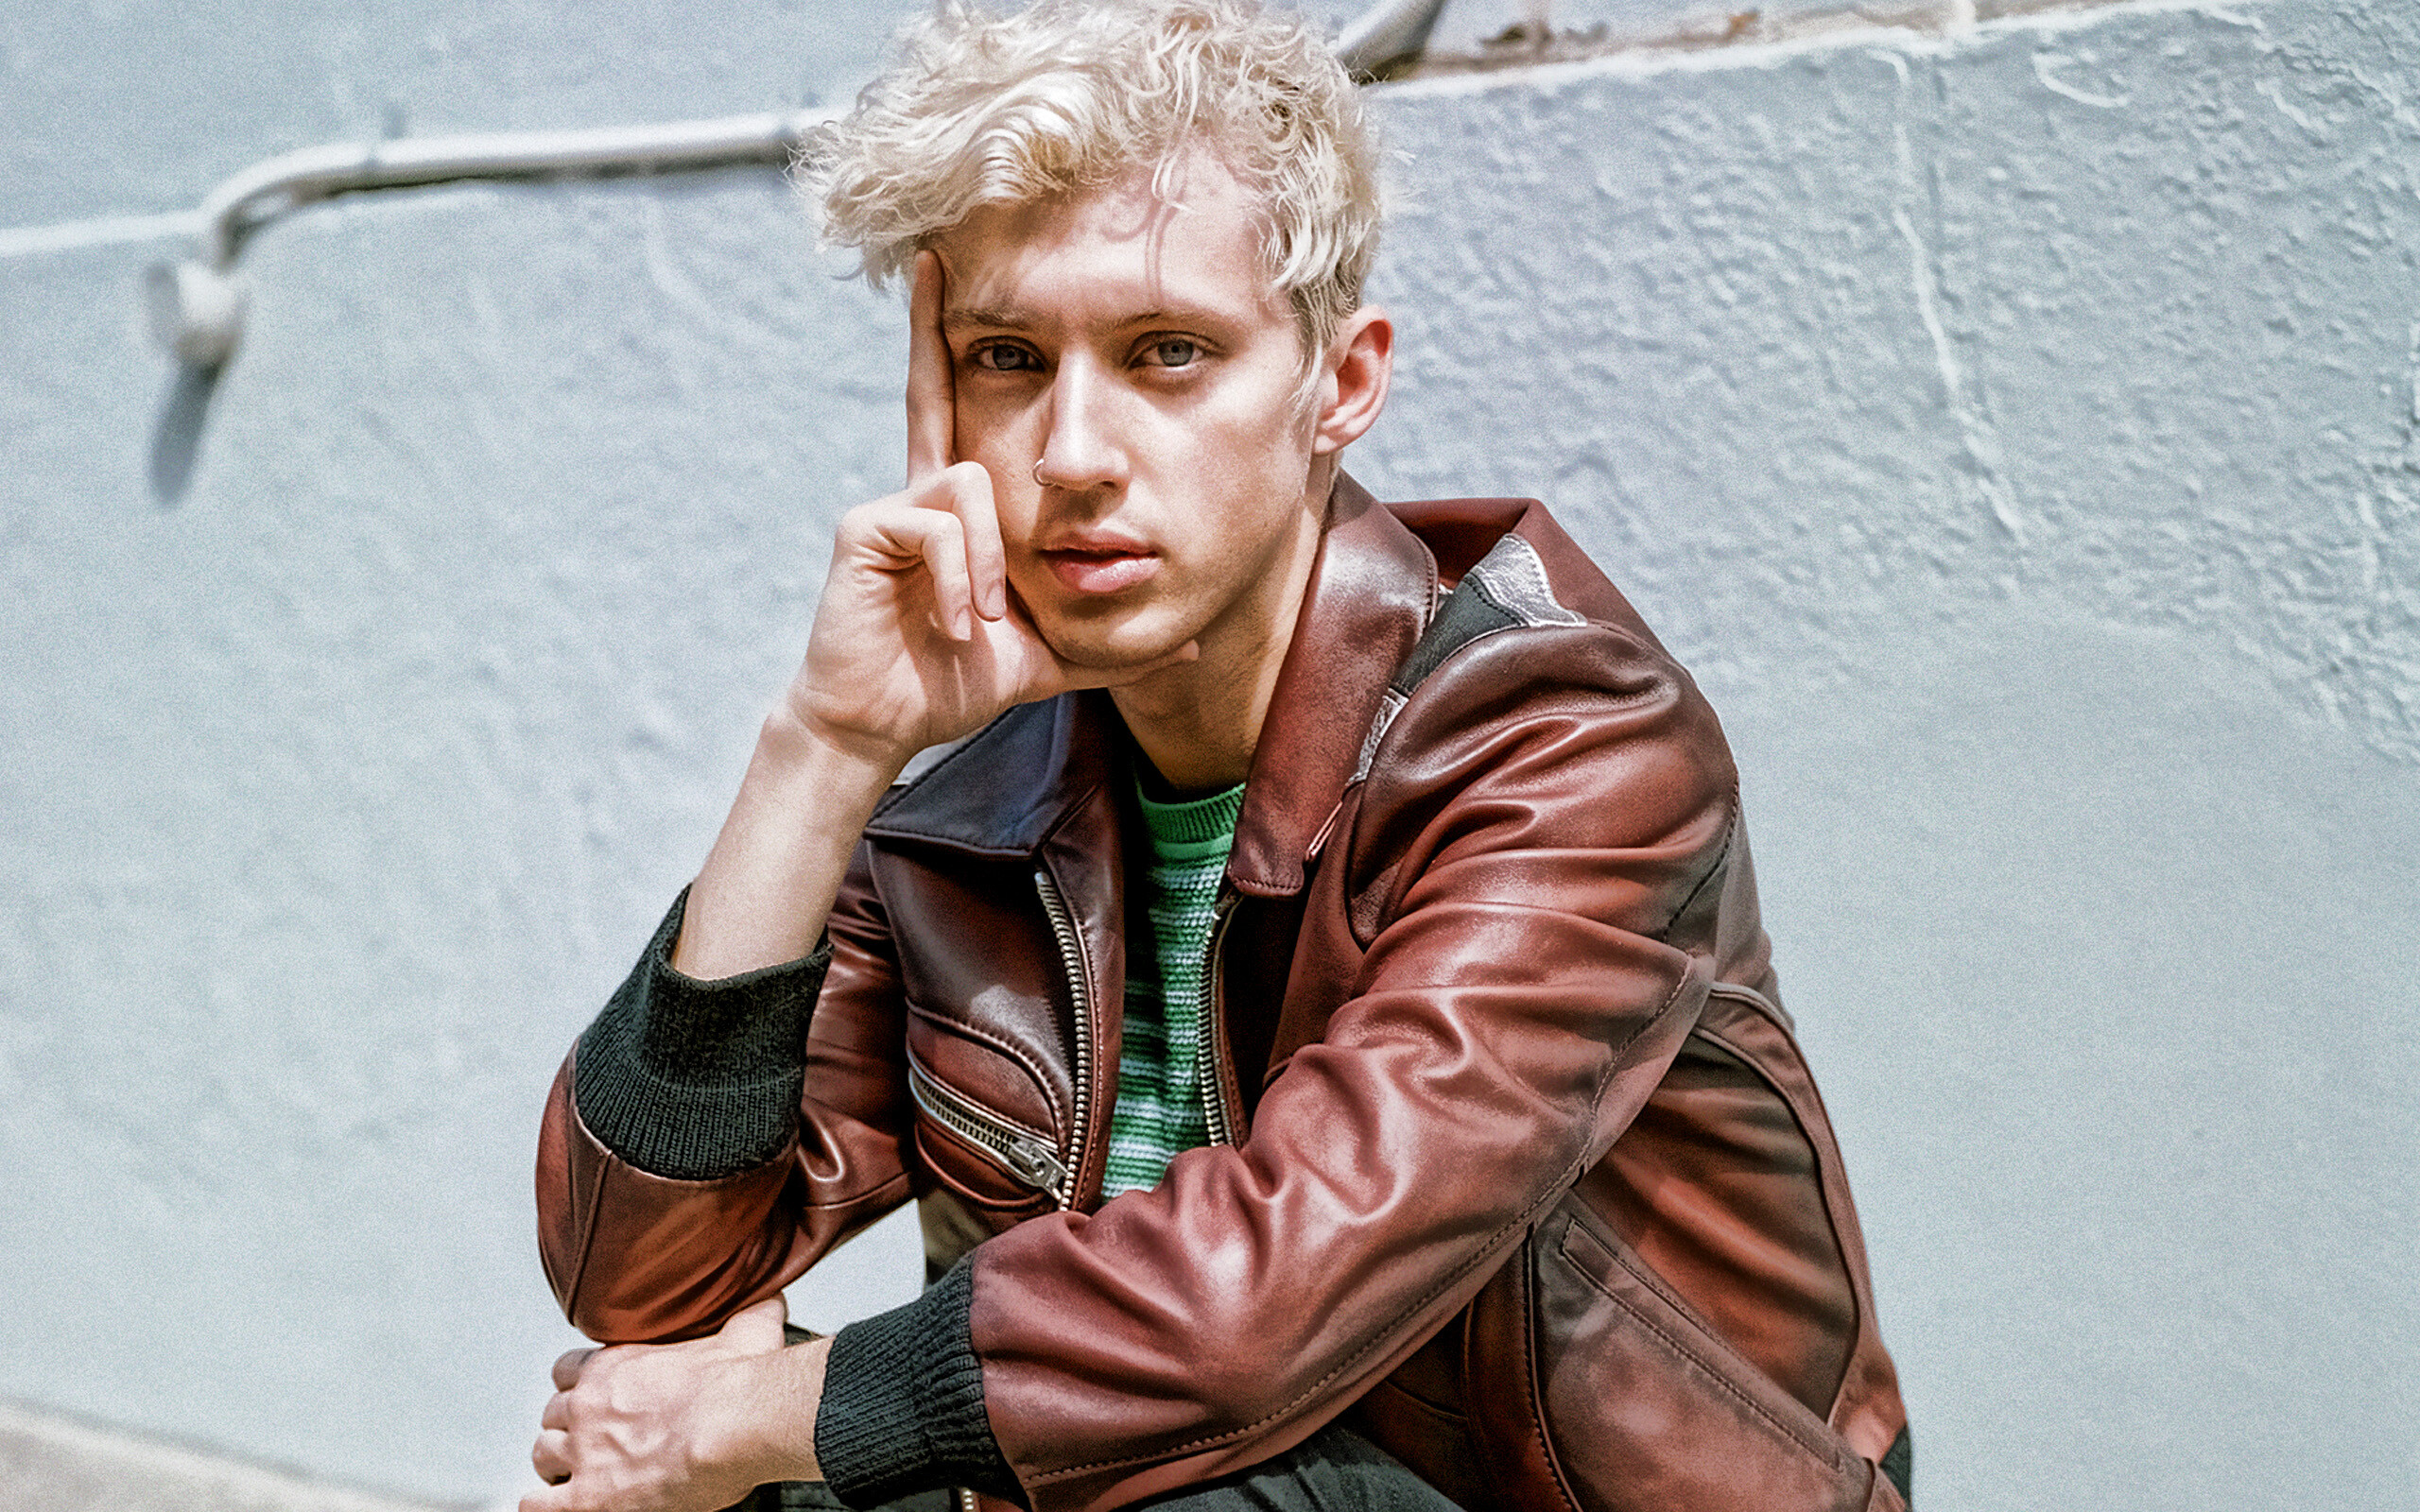 Troye Sivan: Released fourth extended play, Wild, in 2015, An Australian singer-songwriter. 2560x1600 HD Wallpaper.